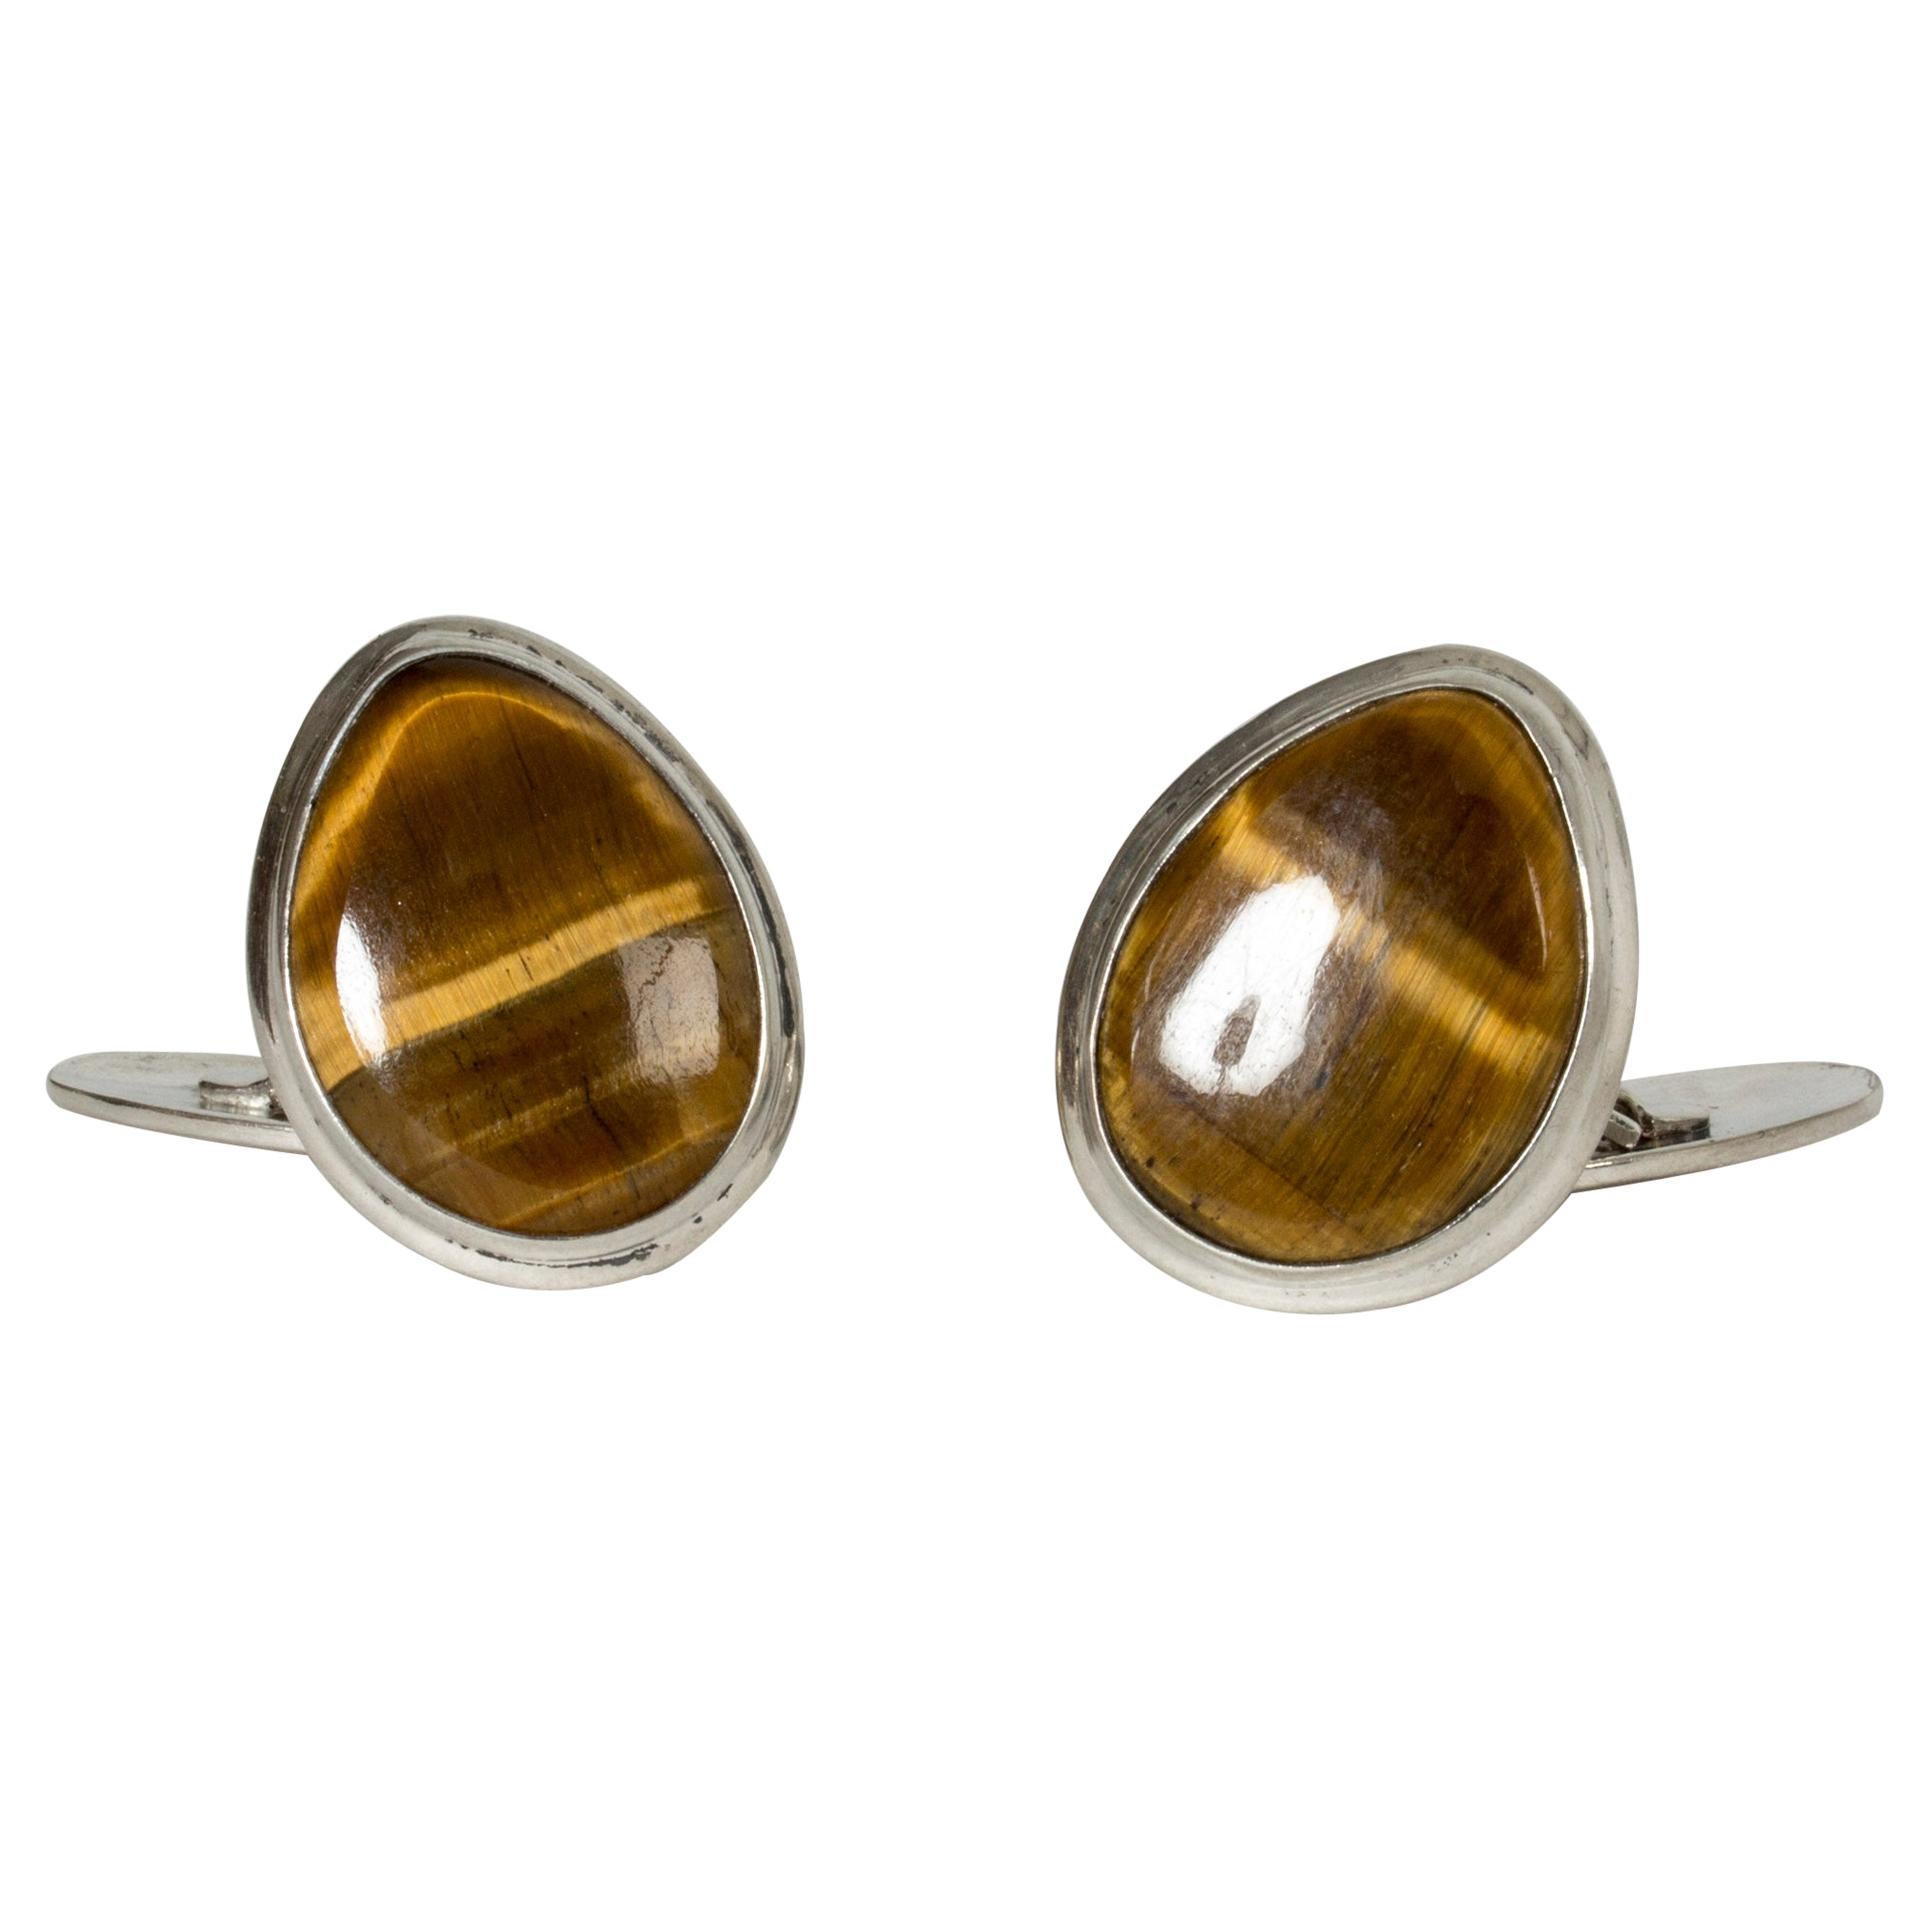 Pair of Midcentury Silver and Tigereye Cufflinks, Sweden, 1960s